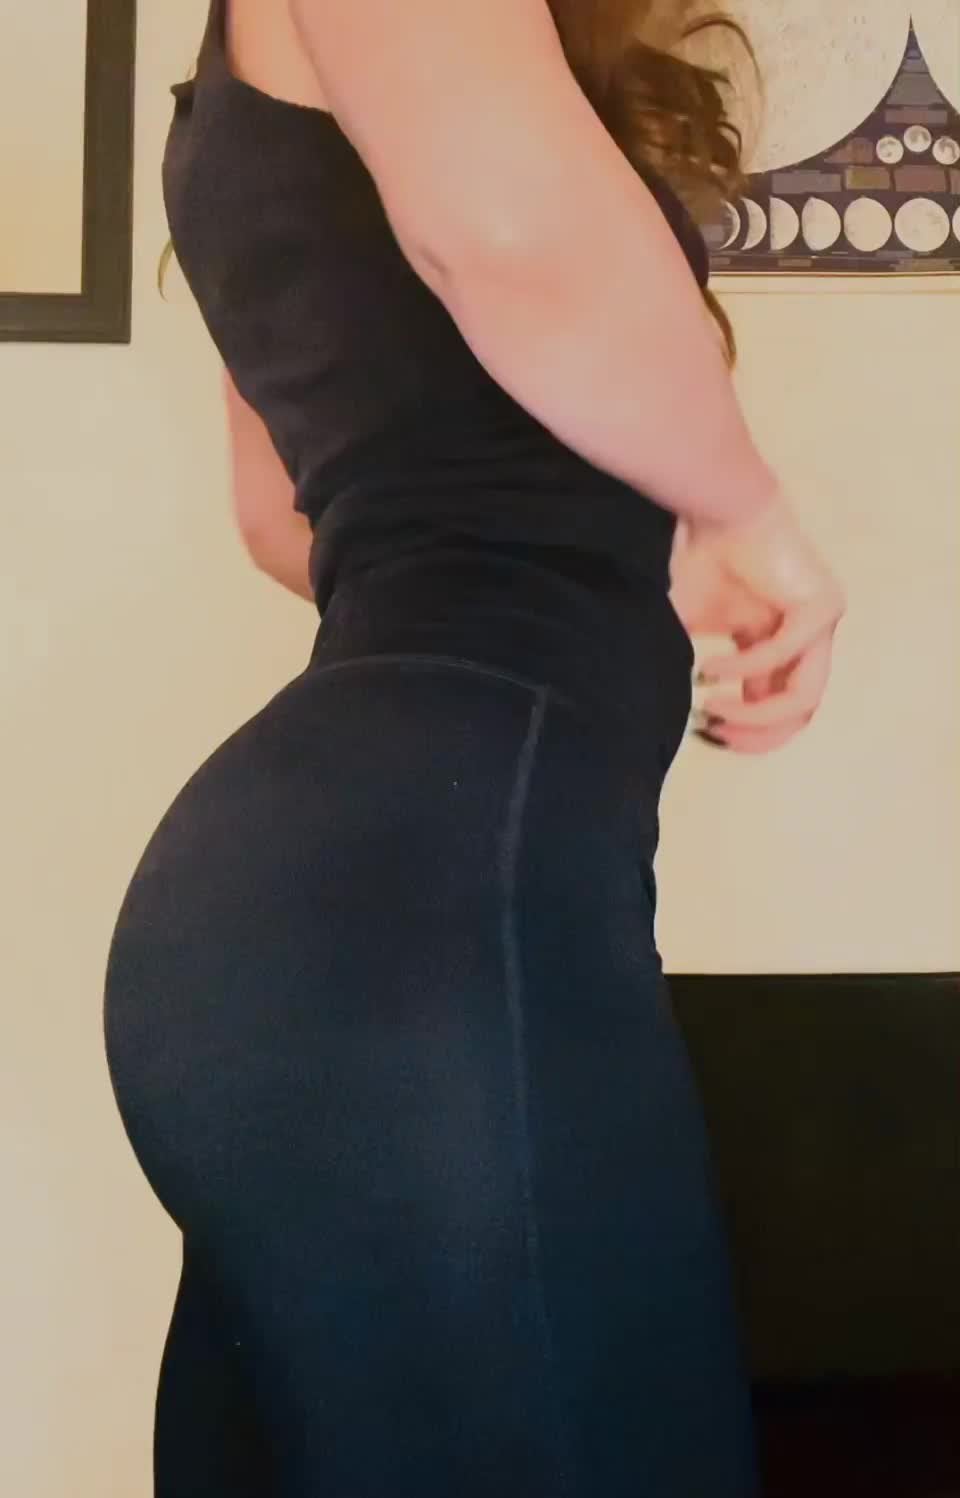 PAWG Happy Saturdaygoing out or staying in